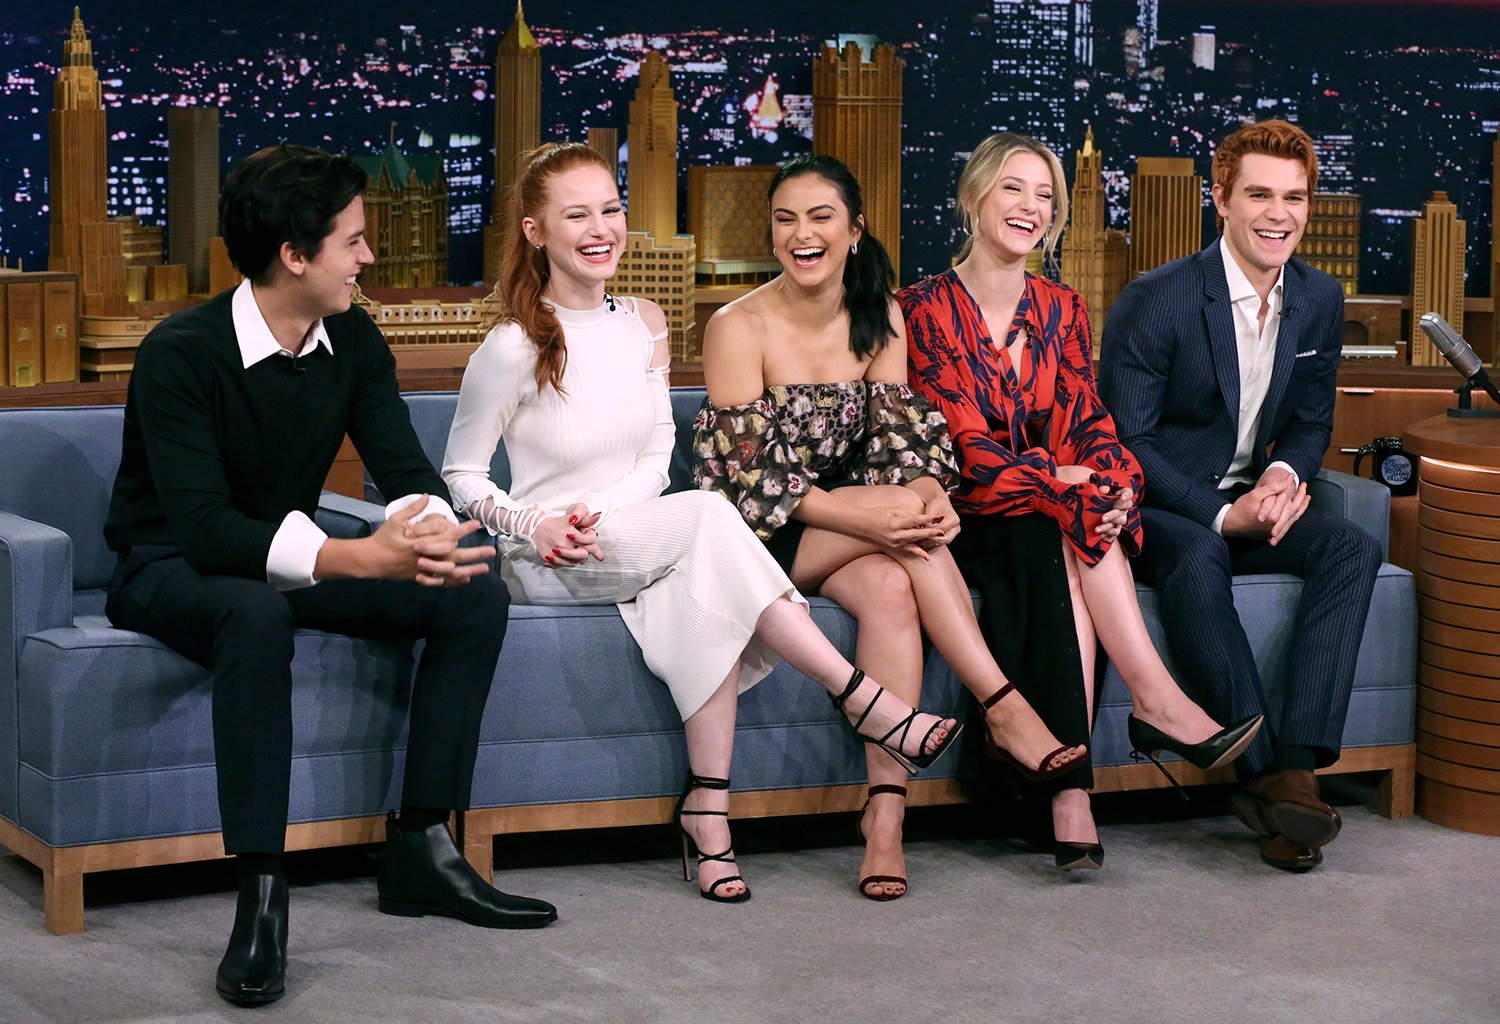 Riverdale cast members Cole Sprouse, Madelaine Petsch, Camila Mendes, Lili Reinhart, and KJ Apa on The Tonight Show Starring Jimmy Fallon.